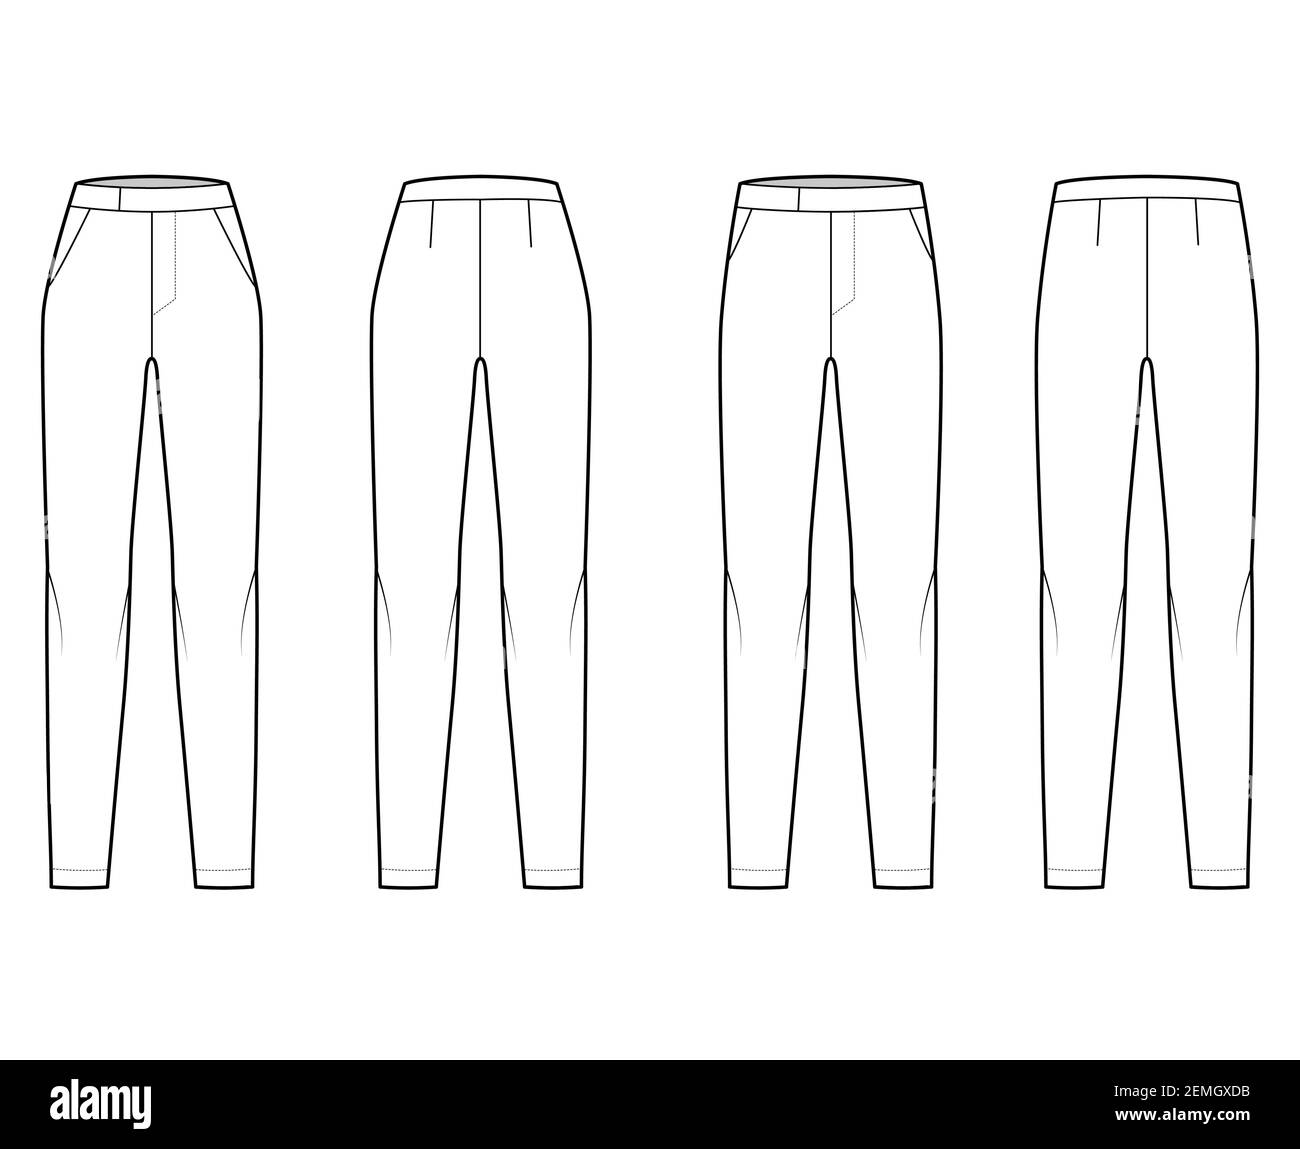 Set of cigarette Pants technical fashion illustration with extended ...